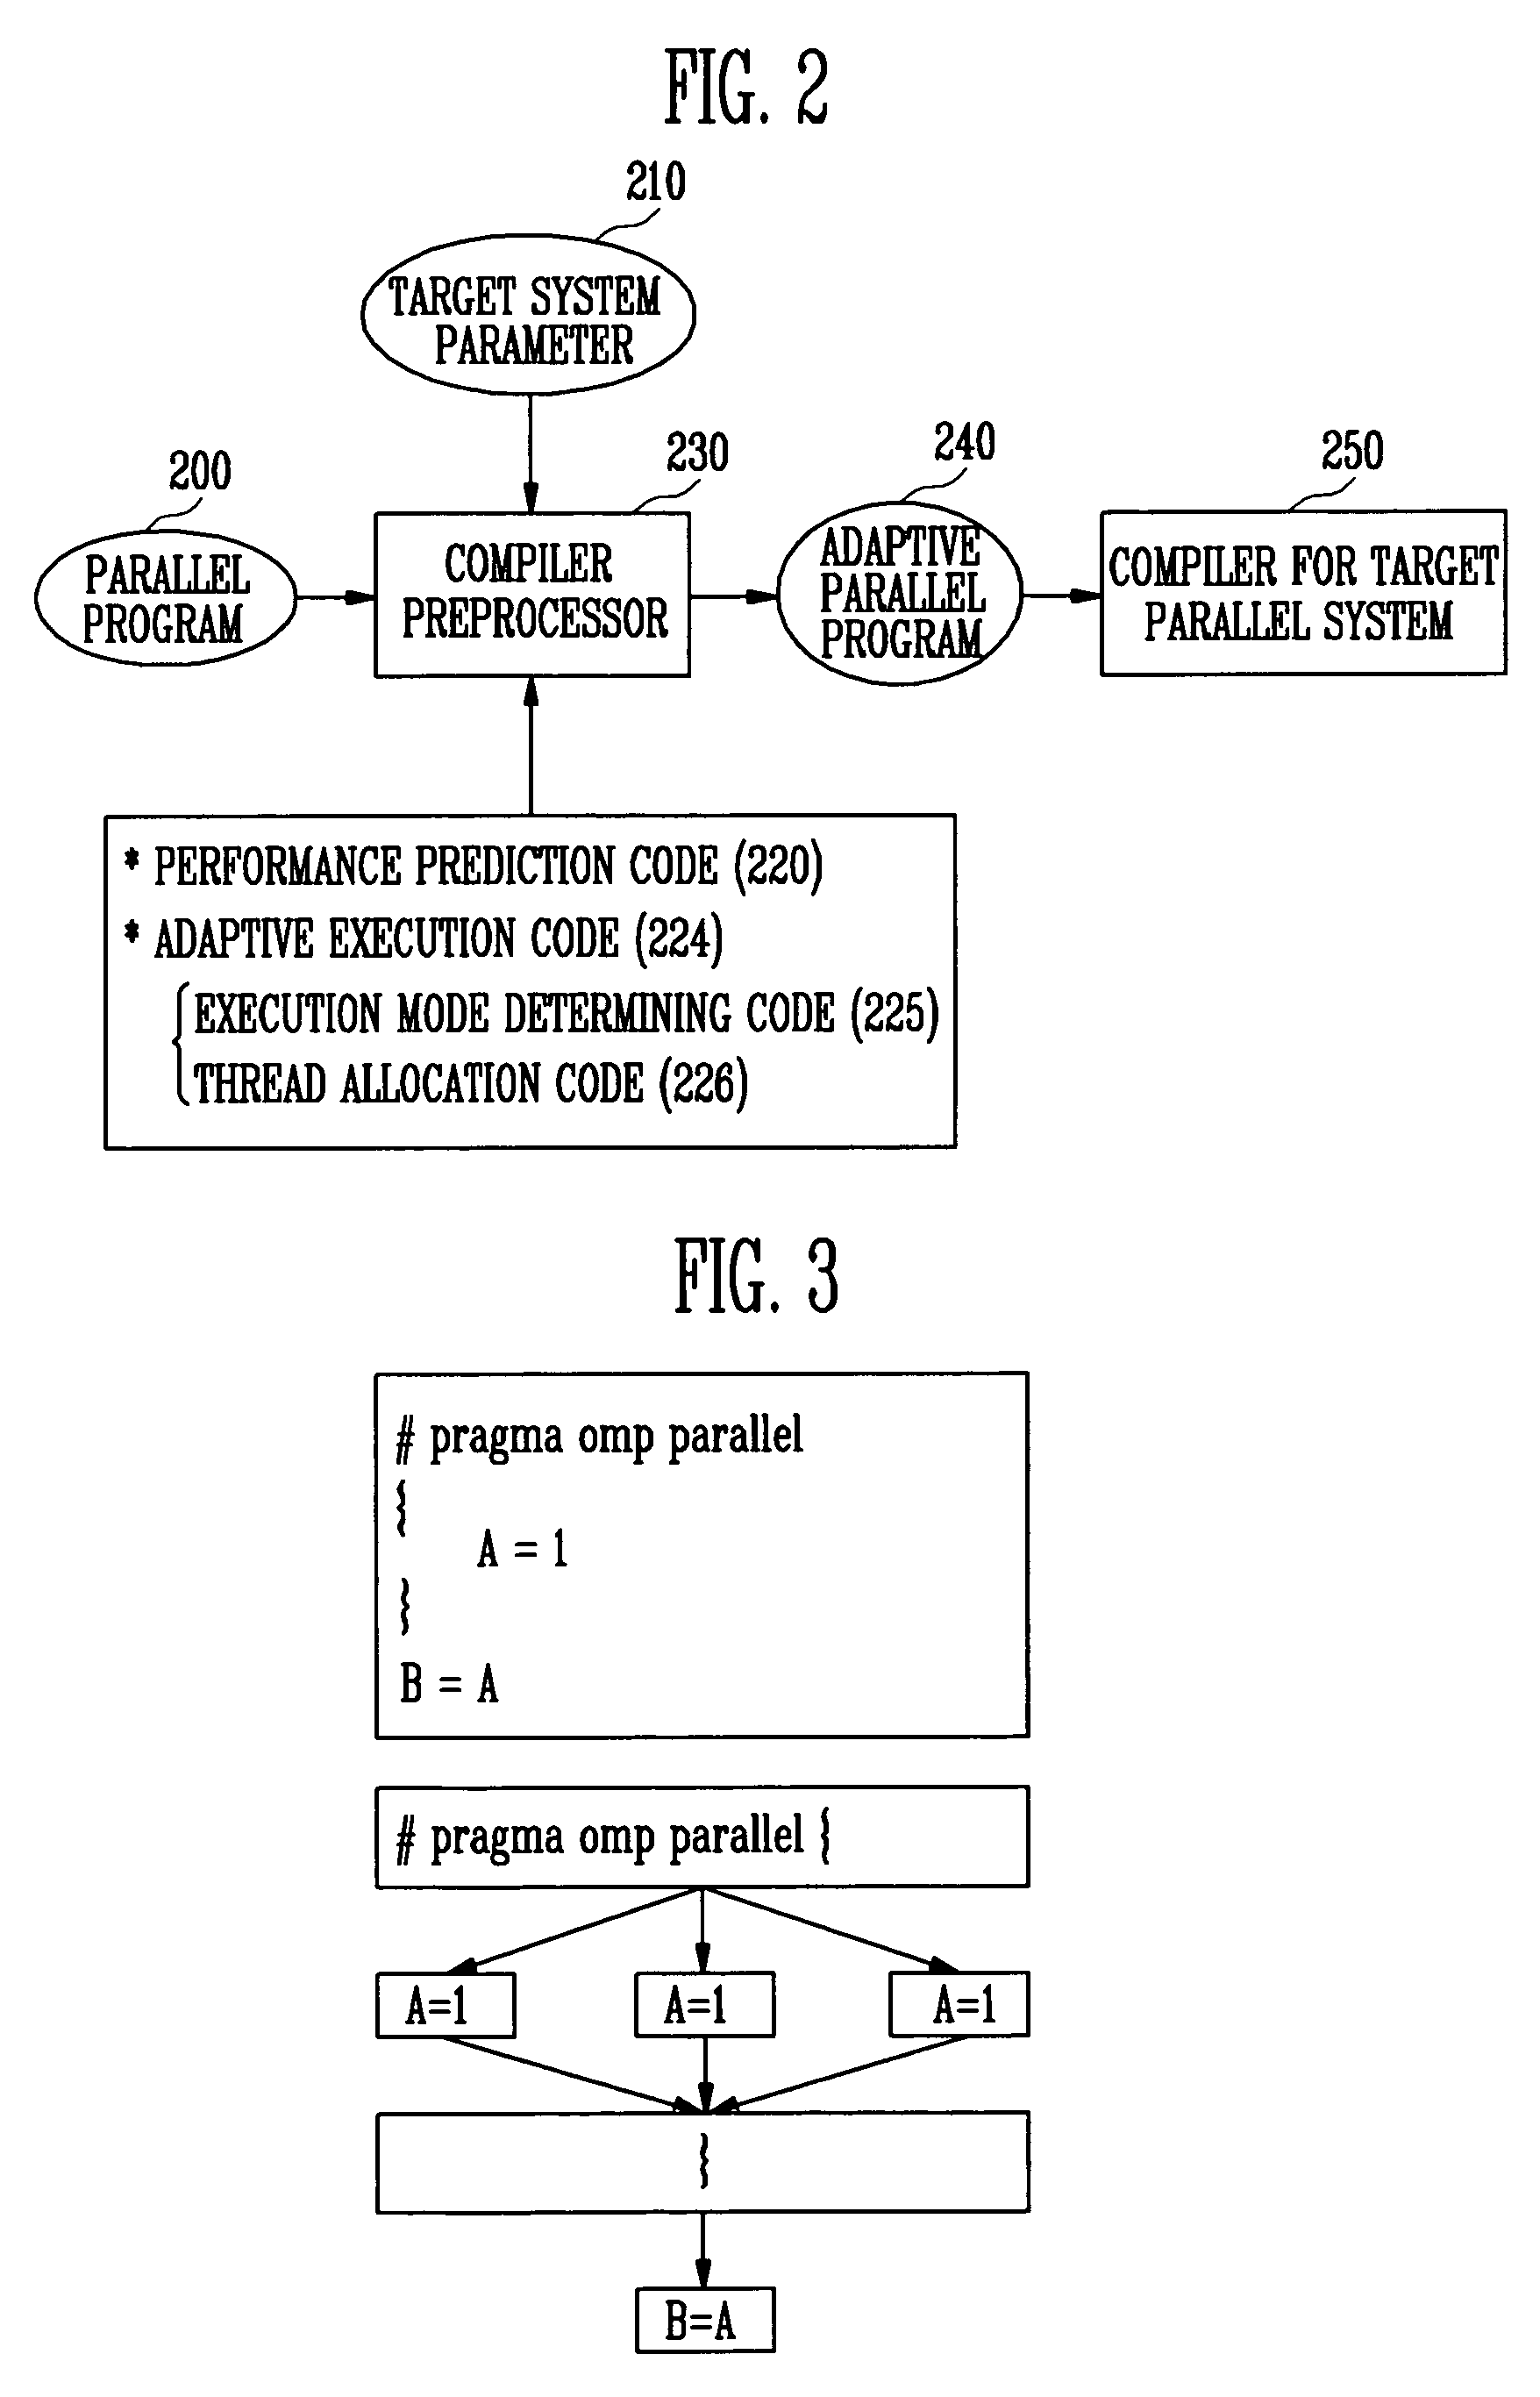 Adaptive execution method for multithreaded processor-based parallel system